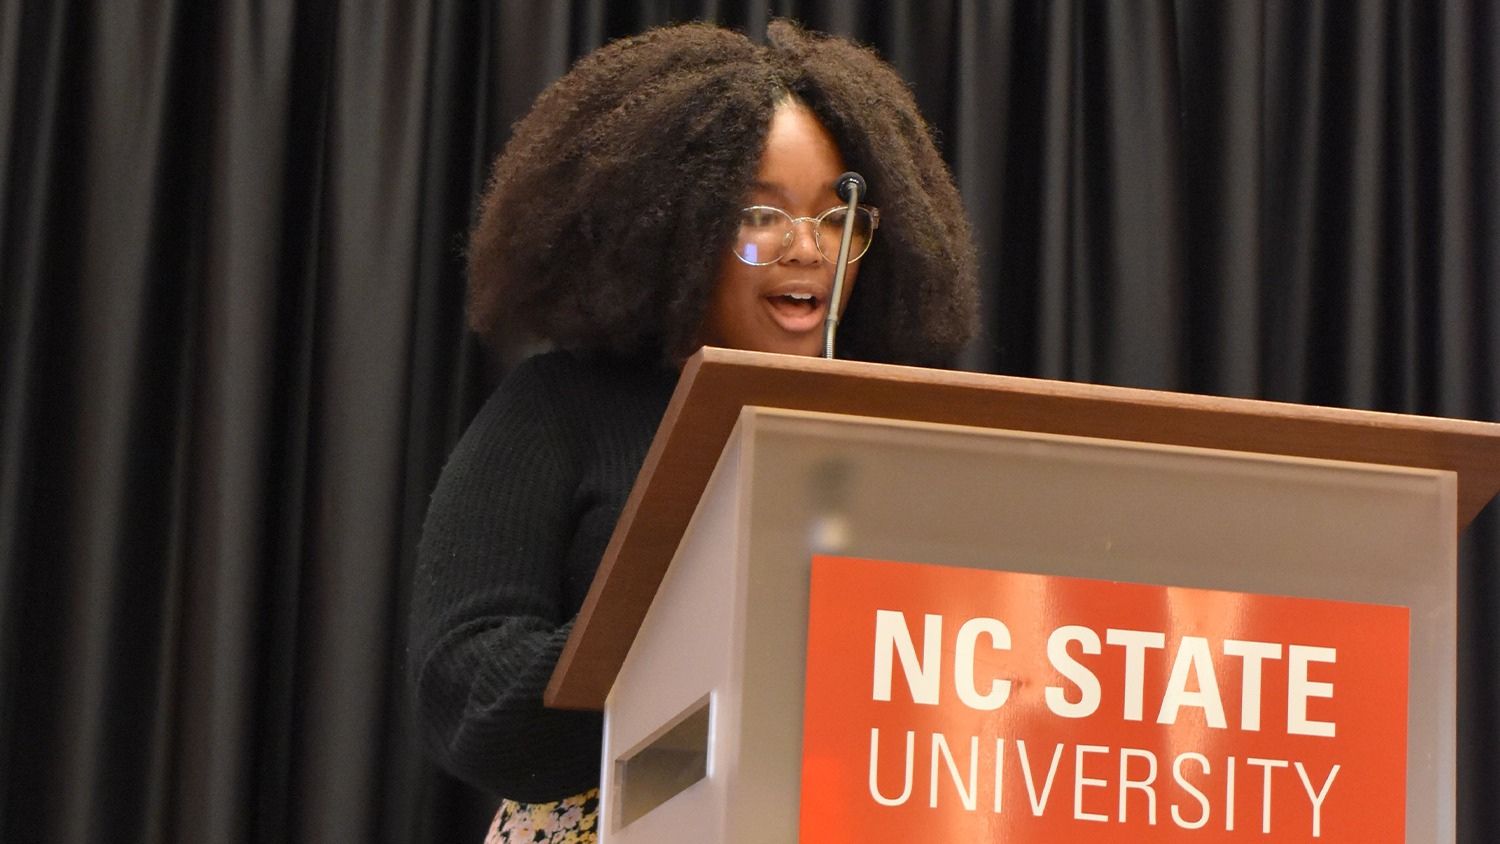 Naudia McKoy standing behind a podium with the NC State logo on it and giving a speech